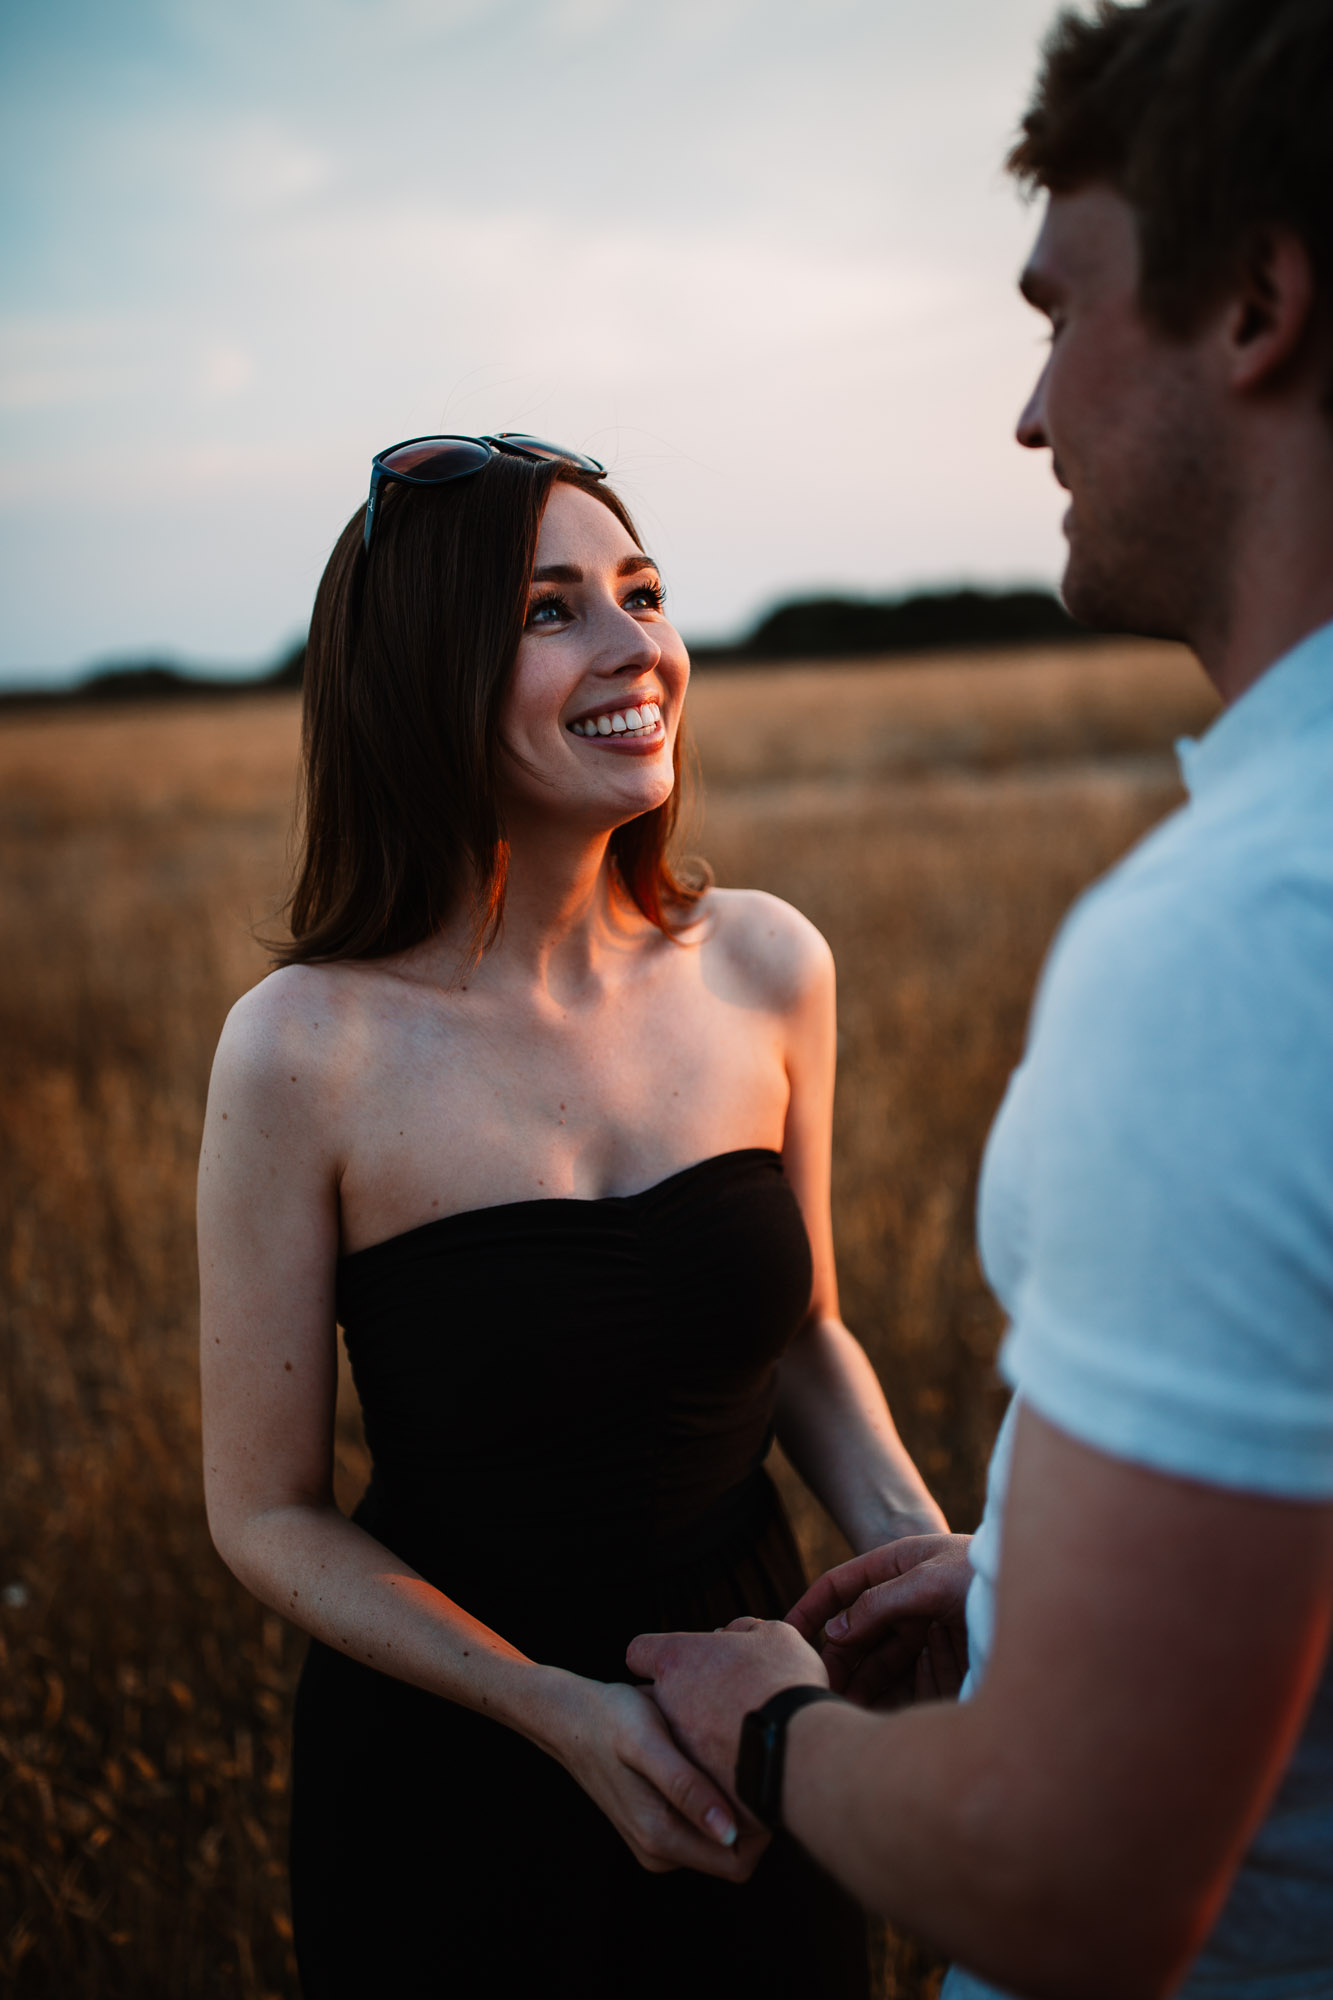 Man laughing looking at woman with hands on hips